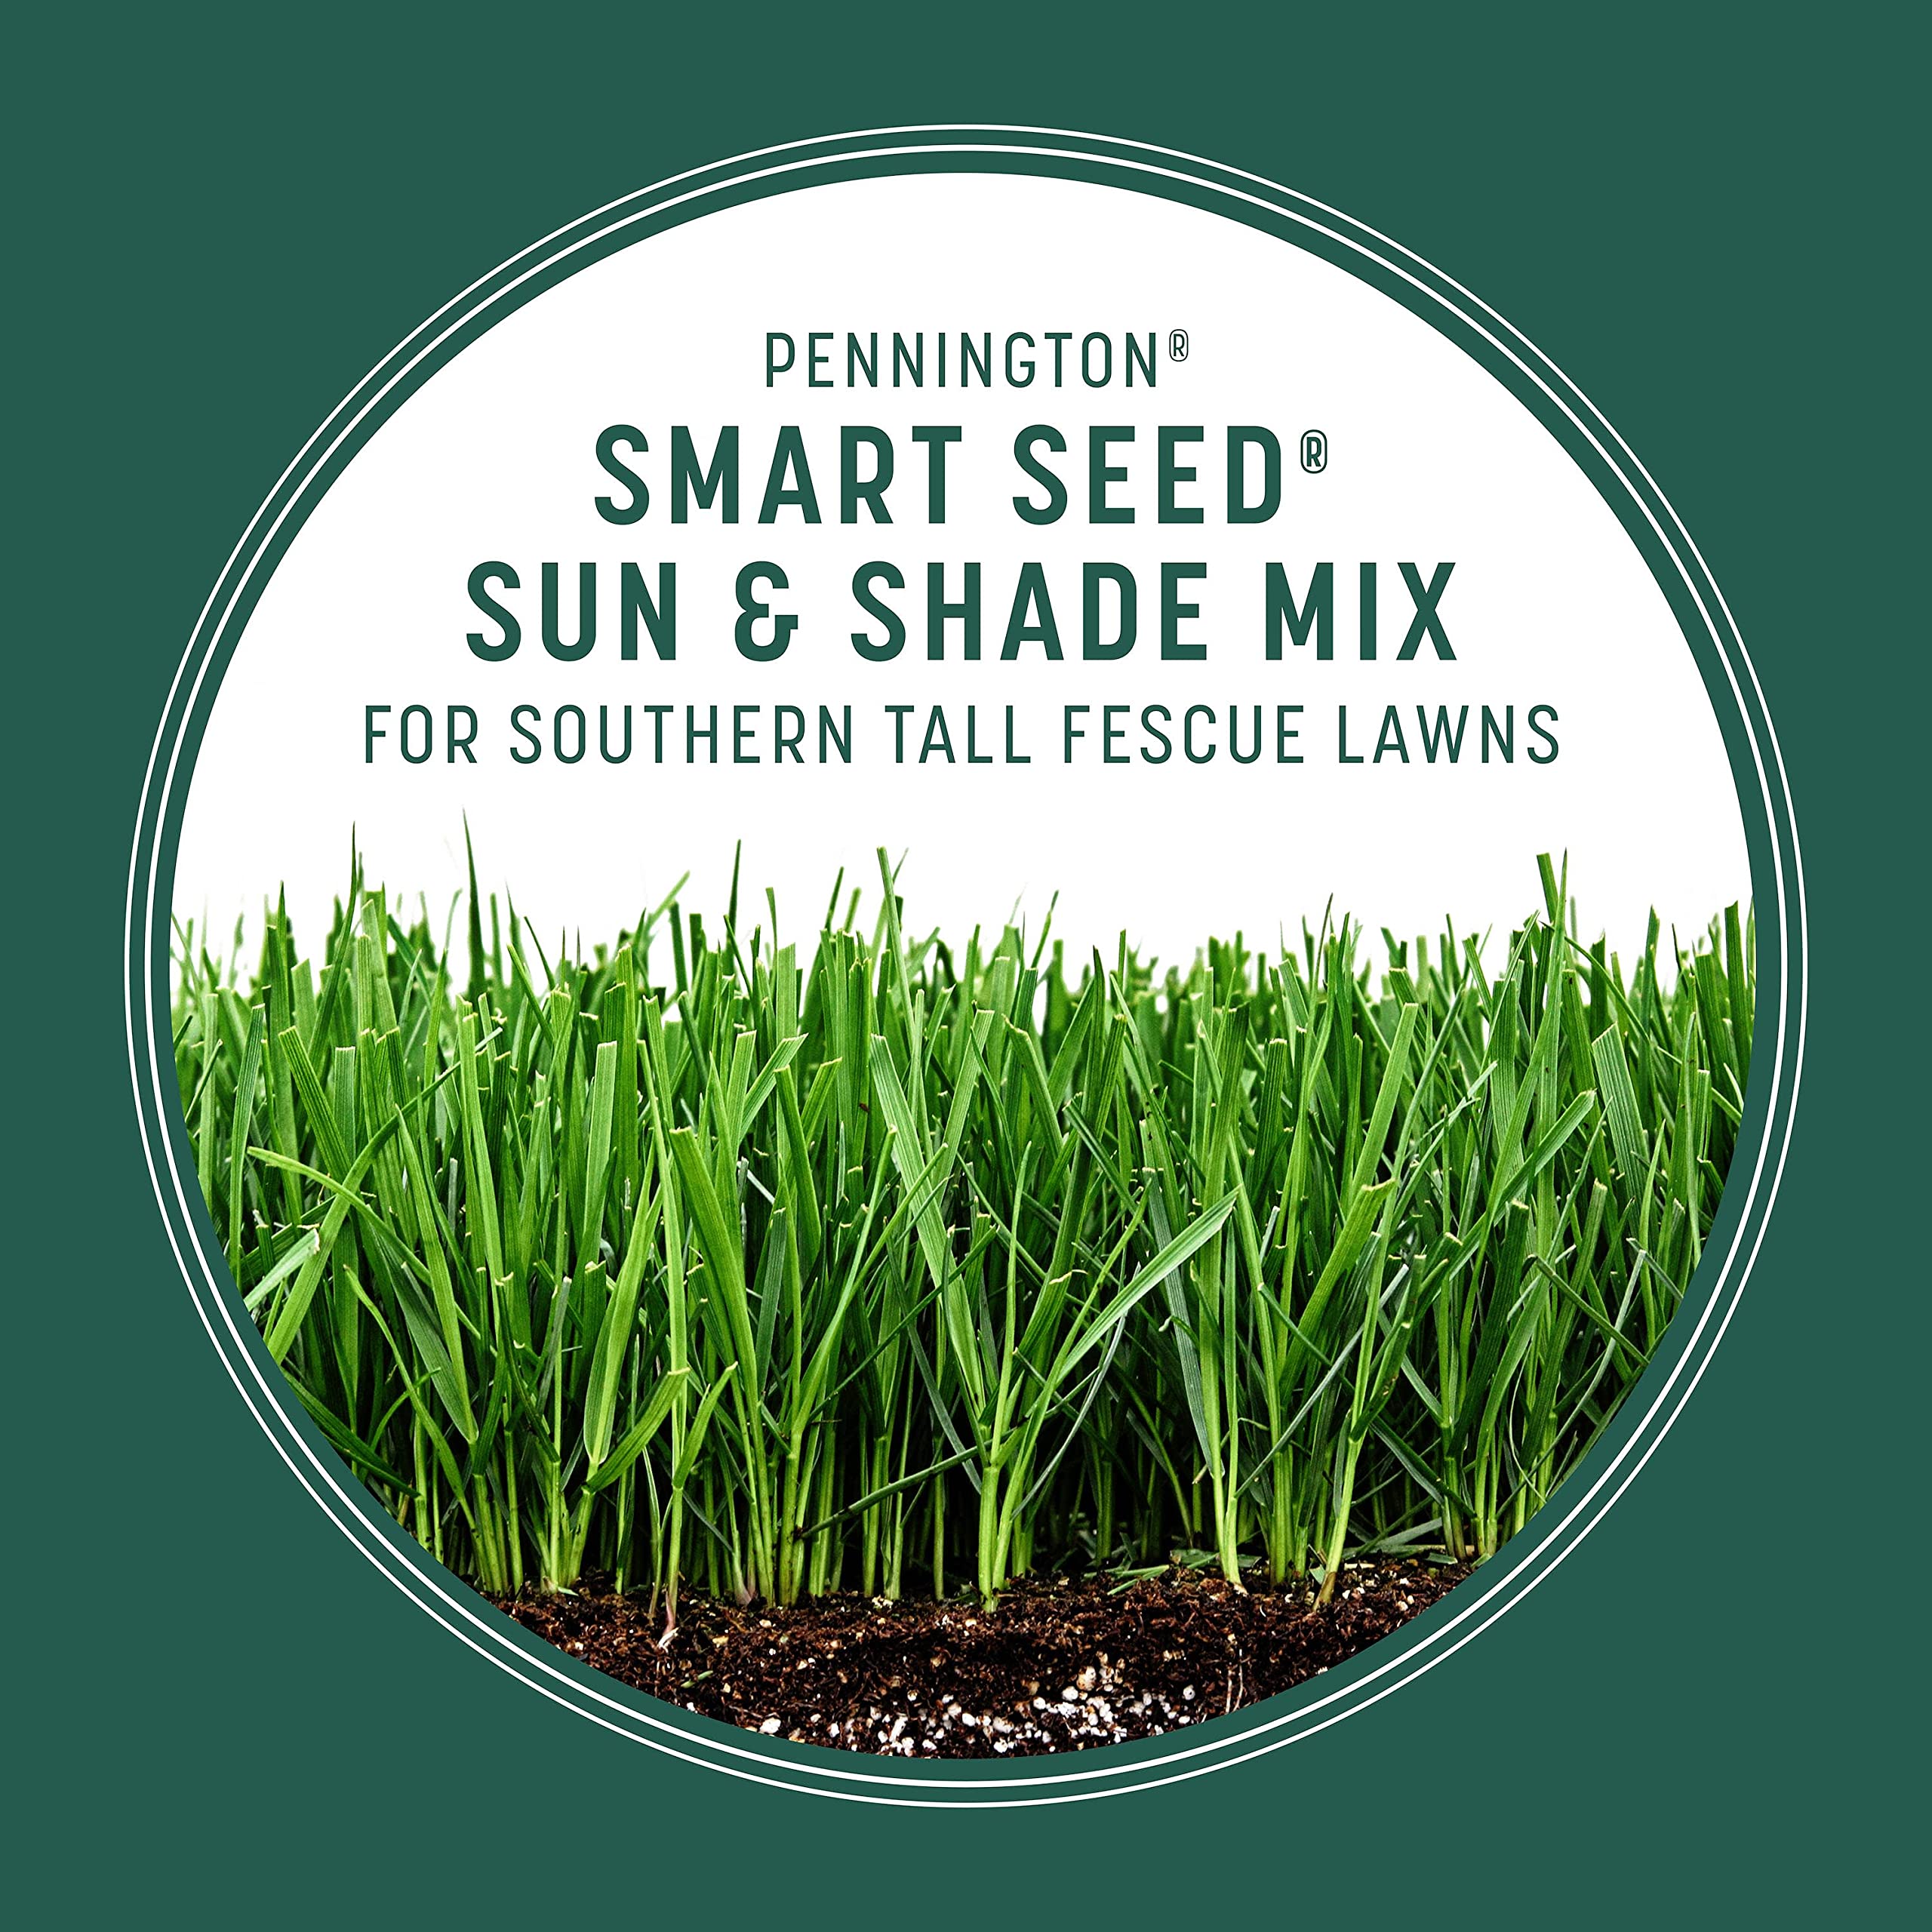 Pennington Smart Seed Sun and Shade Tall Fescue Grass Seed Mix for Southern Lawns 20 lb